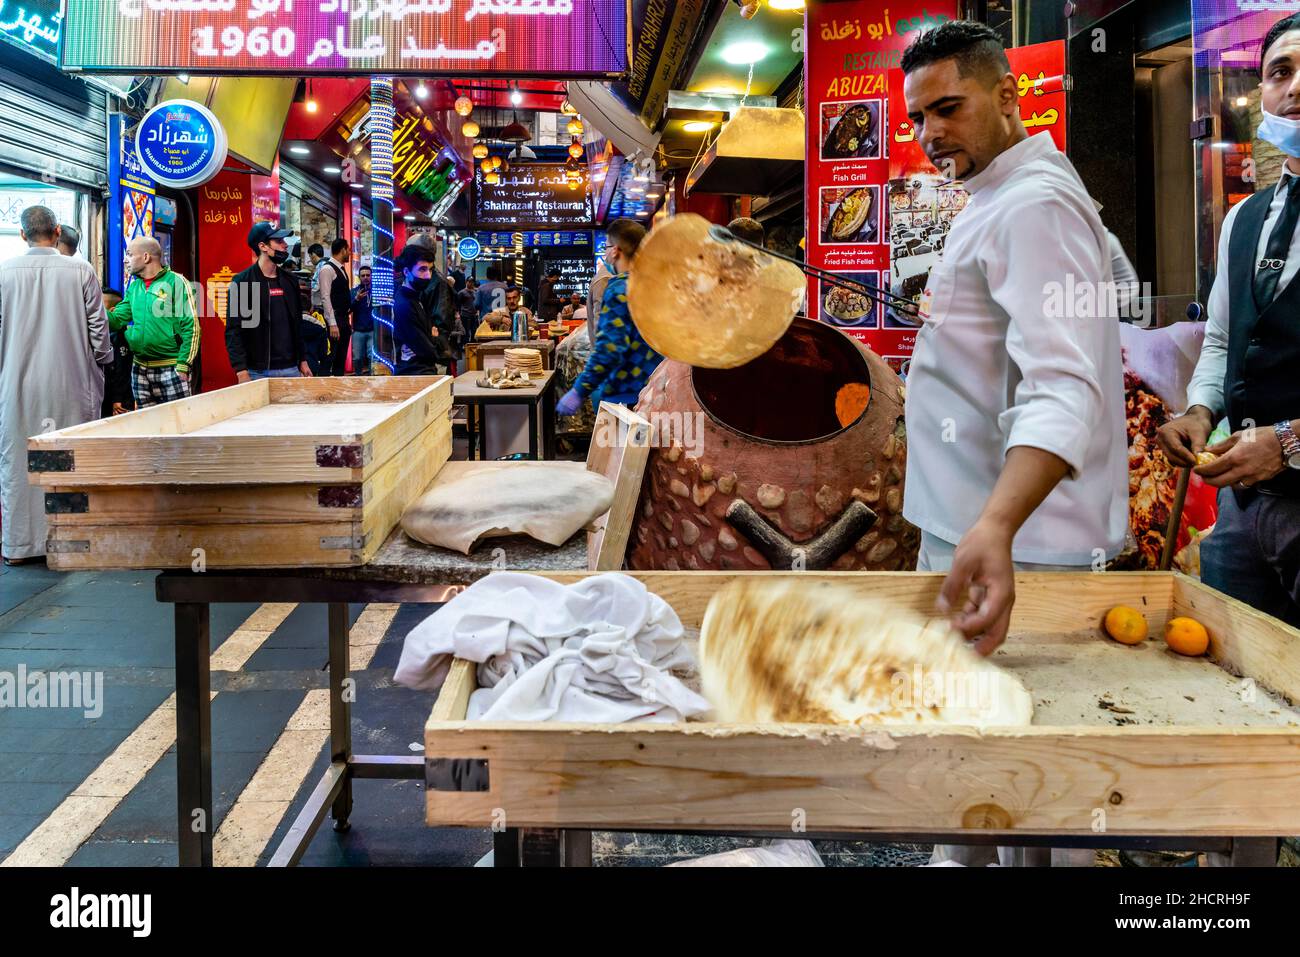 A Young man Putting A Traditional Flat Bread in an Oven, Abuzaghleh Restaurant, Downtown Amman, Amman, Jordanien. Stockfoto